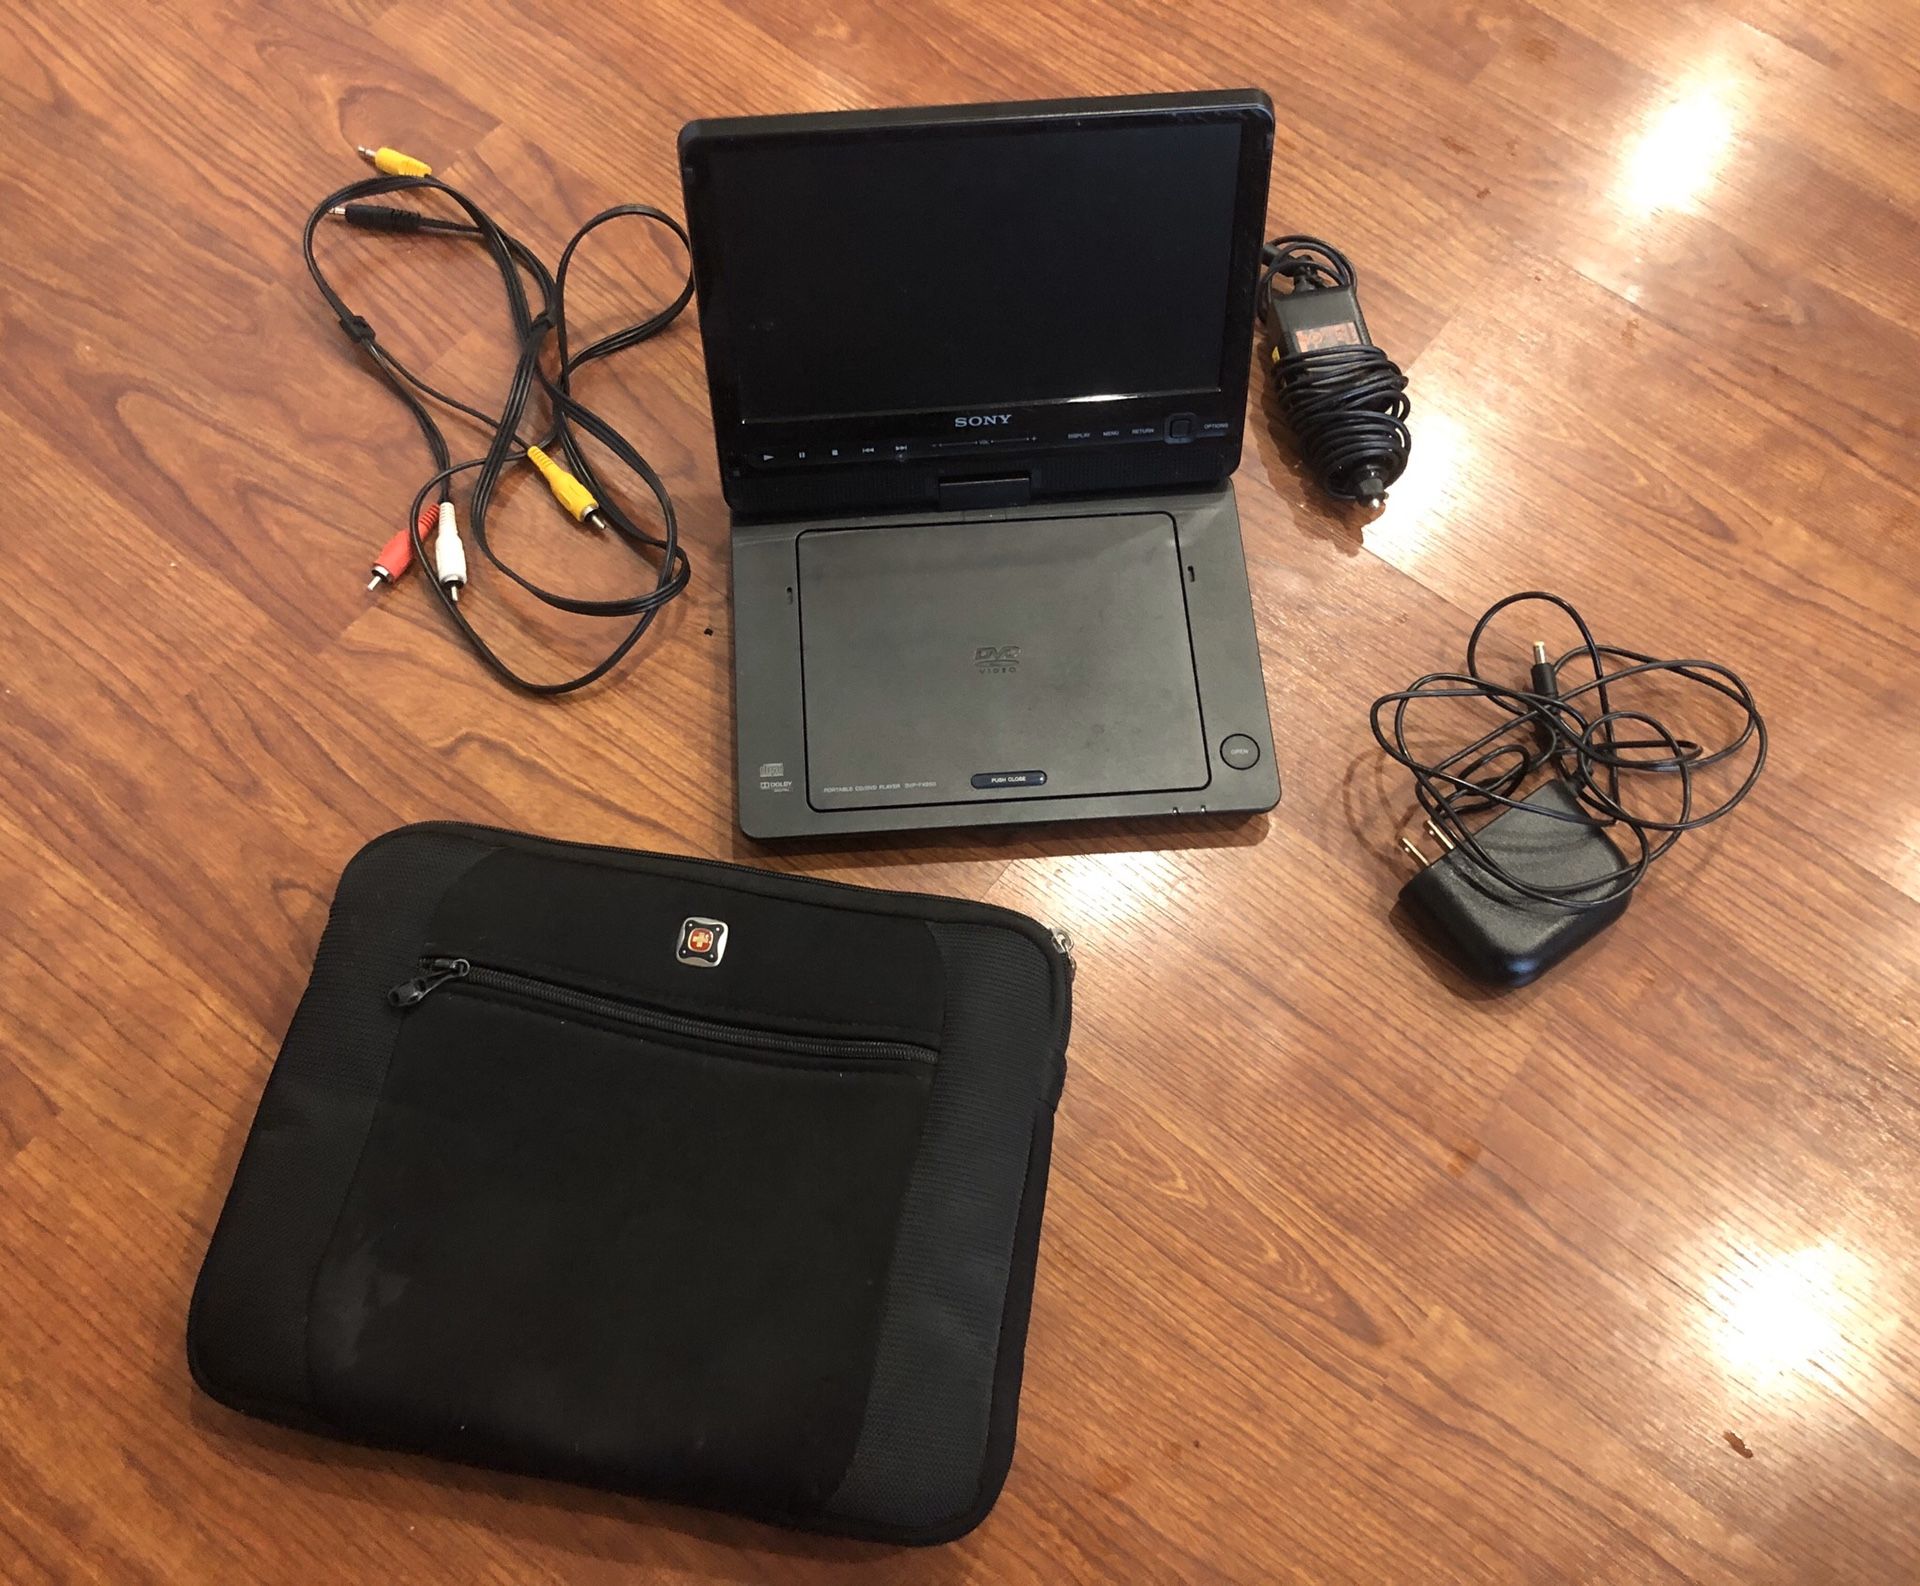 Travel DVD player. Great for kids - includes Swiss Gear case, car charger, wall charger, remote, and connection cables to use with TV